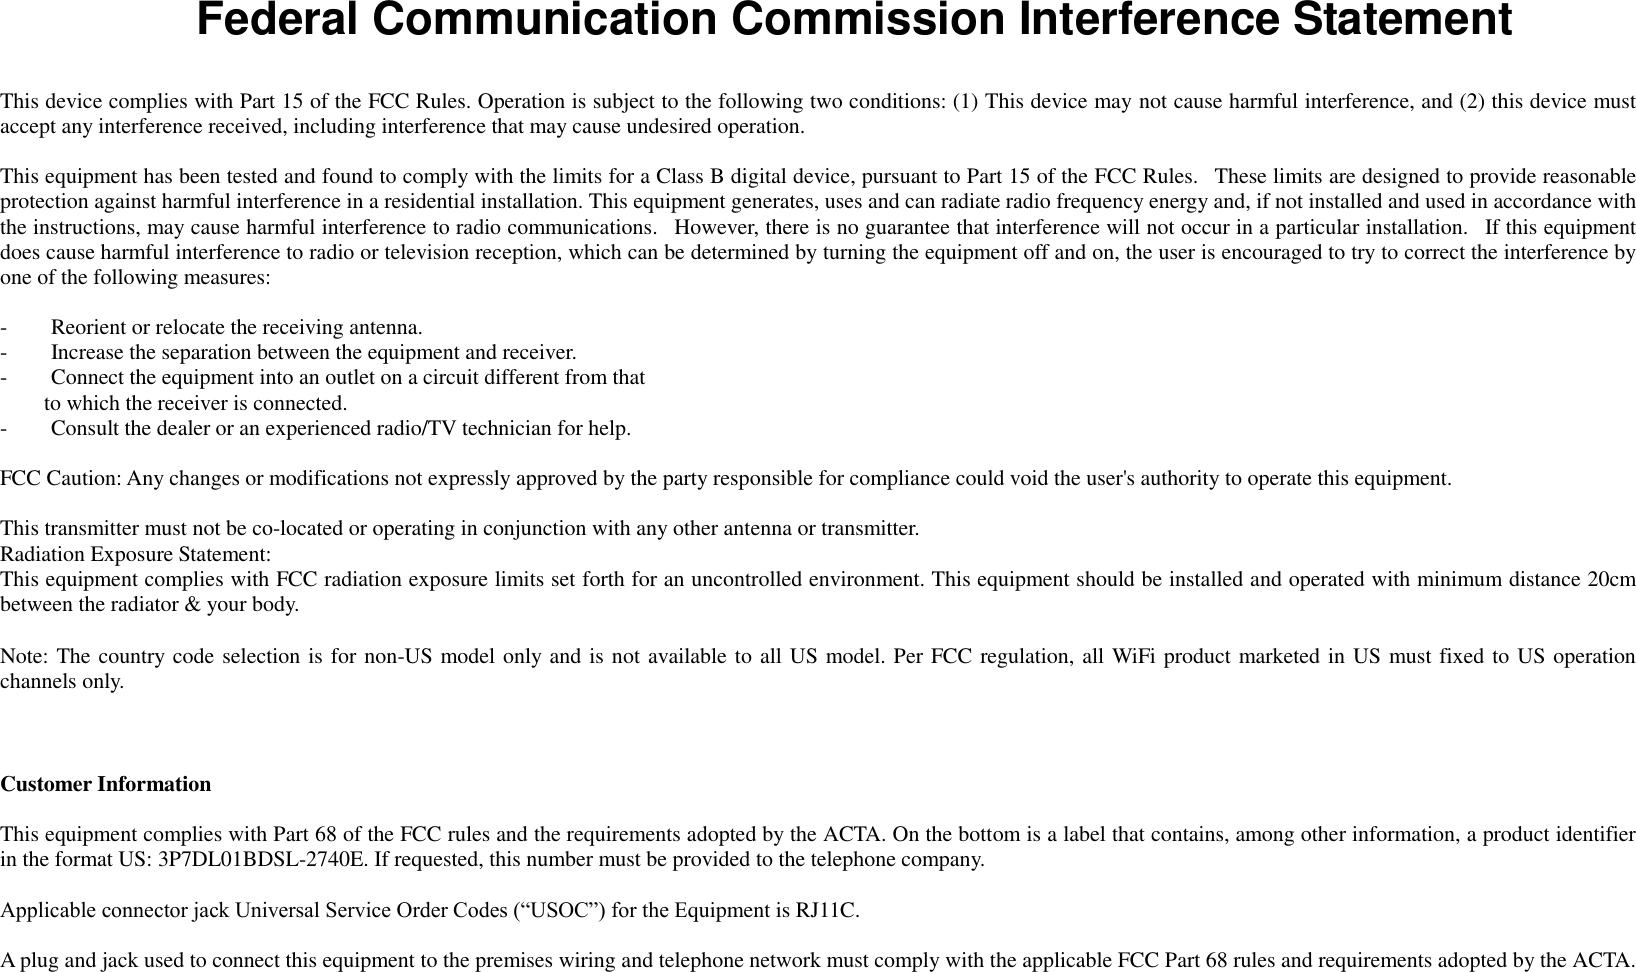   Federal Communication Commission Interference Statement  This device complies with Part 15 of the FCC Rules. Operation is subject to the following two conditions: (1) This device may not cause harmful interference, and (2) this device must accept any interference received, including interference that may cause undesired operation.  This equipment has been tested and found to comply with the limits for a Class B digital device, pursuant to Part 15 of the FCC Rules.   These limits are designed to provide reasonable protection against harmful interference in a residential installation. This equipment generates, uses and can radiate radio frequency energy and, if not installed and used in accordance with the instructions, may cause harmful interference to radio communications.   However, there is no guarantee that interference will not occur in a particular installation.   If this equipment does cause harmful interference to radio or television reception, which can be determined by turning the equipment off and on, the user is encouraged to try to correct the interference by one of the following measures:  -        Reorient or relocate the receiving antenna. -        Increase the separation between the equipment and receiver. -        Connect the equipment into an outlet on a circuit different from that         to which the receiver is connected. -        Consult the dealer or an experienced radio/TV technician for help.  FCC Caution: Any changes or modifications not expressly approved by the party responsible for compliance could void the user&apos;s authority to operate this equipment.  This transmitter must not be co-located or operating in conjunction with any other antenna or transmitter. Radiation Exposure Statement: This equipment complies with FCC radiation exposure limits set forth for an uncontrolled environment. This equipment should be installed and operated with minimum distance 20cm between the radiator &amp; your body.  Note: The country code selection is for non-US model only and is not available to all US model. Per FCC regulation, all WiFi product marketed in US must fixed to US operation channels only.    Customer Information  This equipment complies with Part 68 of the FCC rules and the requirements adopted by the ACTA. On the bottom is a label that contains, among other information, a product identifier in the format US: 3P7DL01BDSL-2740E. If requested, this number must be provided to the telephone company.  Applicable connector jack Universal Service Order Codes (“USOC”) for the Equipment is RJ11C.  A plug and jack used to connect this equipment to the premises wiring and telephone network must comply with the applicable FCC Part 68 rules and requirements adopted by the ACTA. 